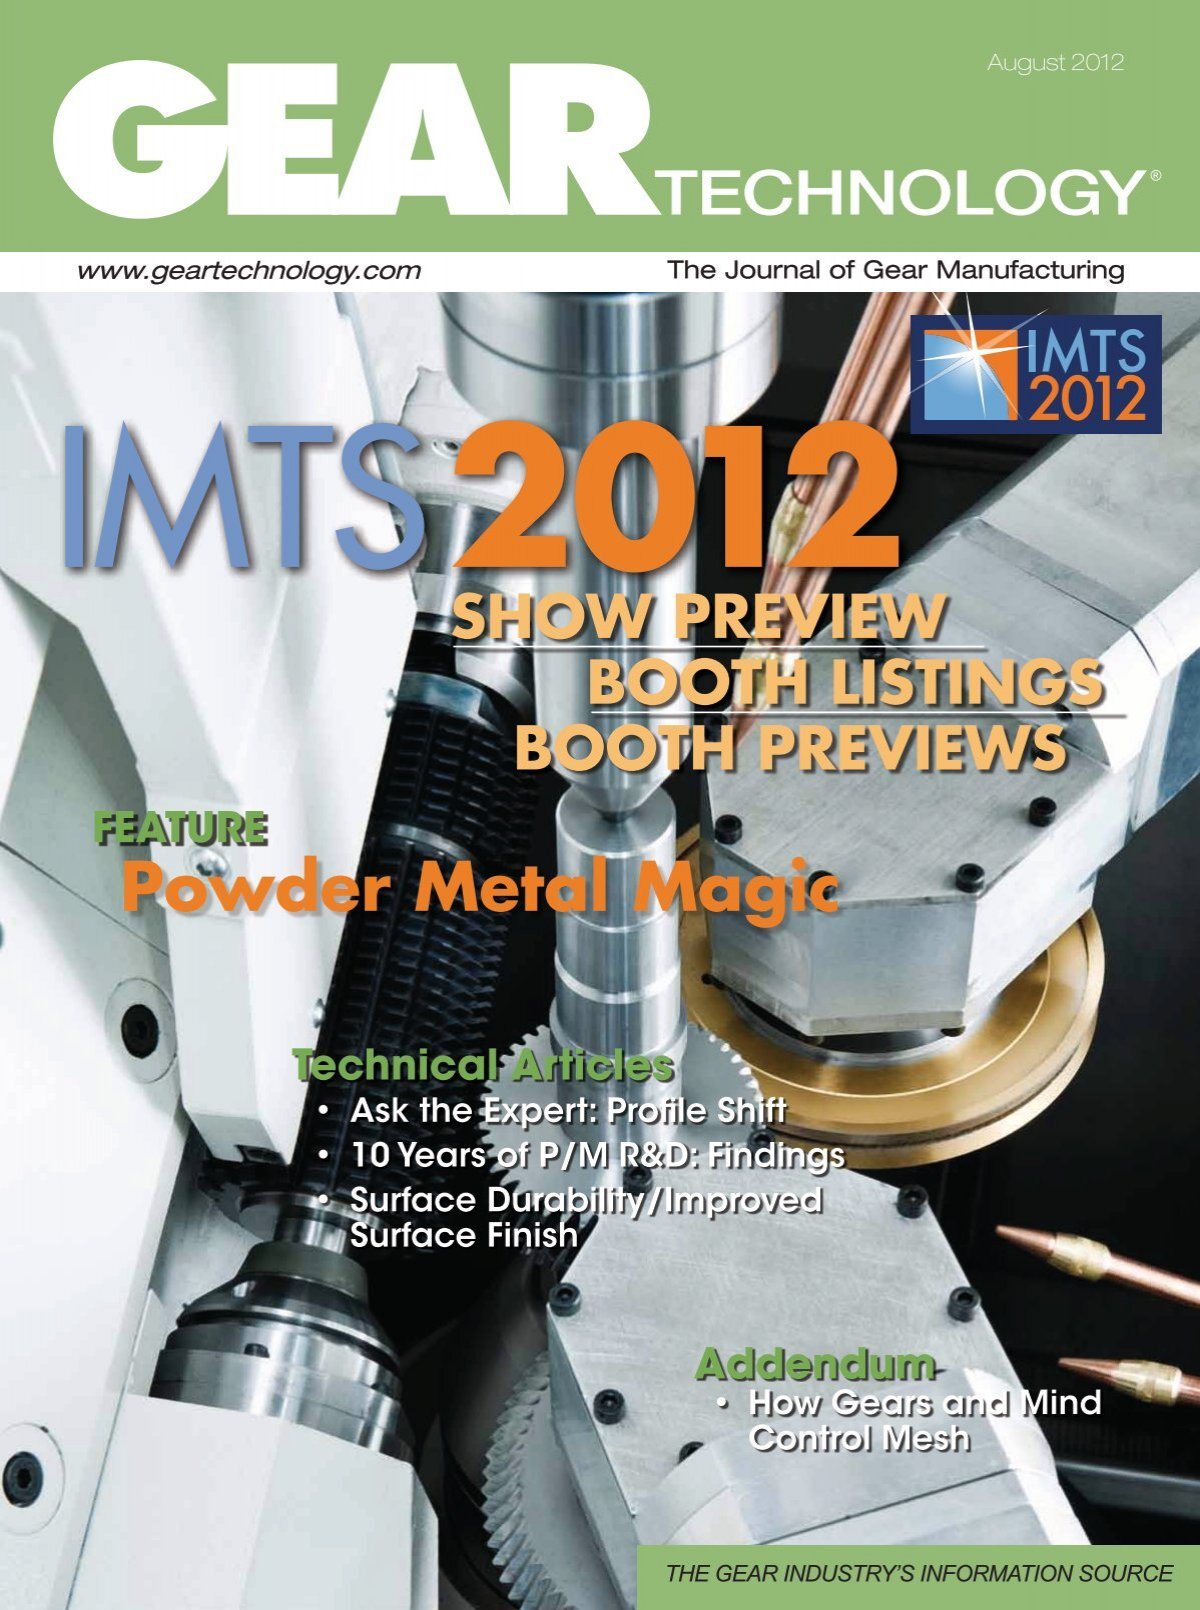 Download the August 2012 Issue in PDF format - Gear Technology